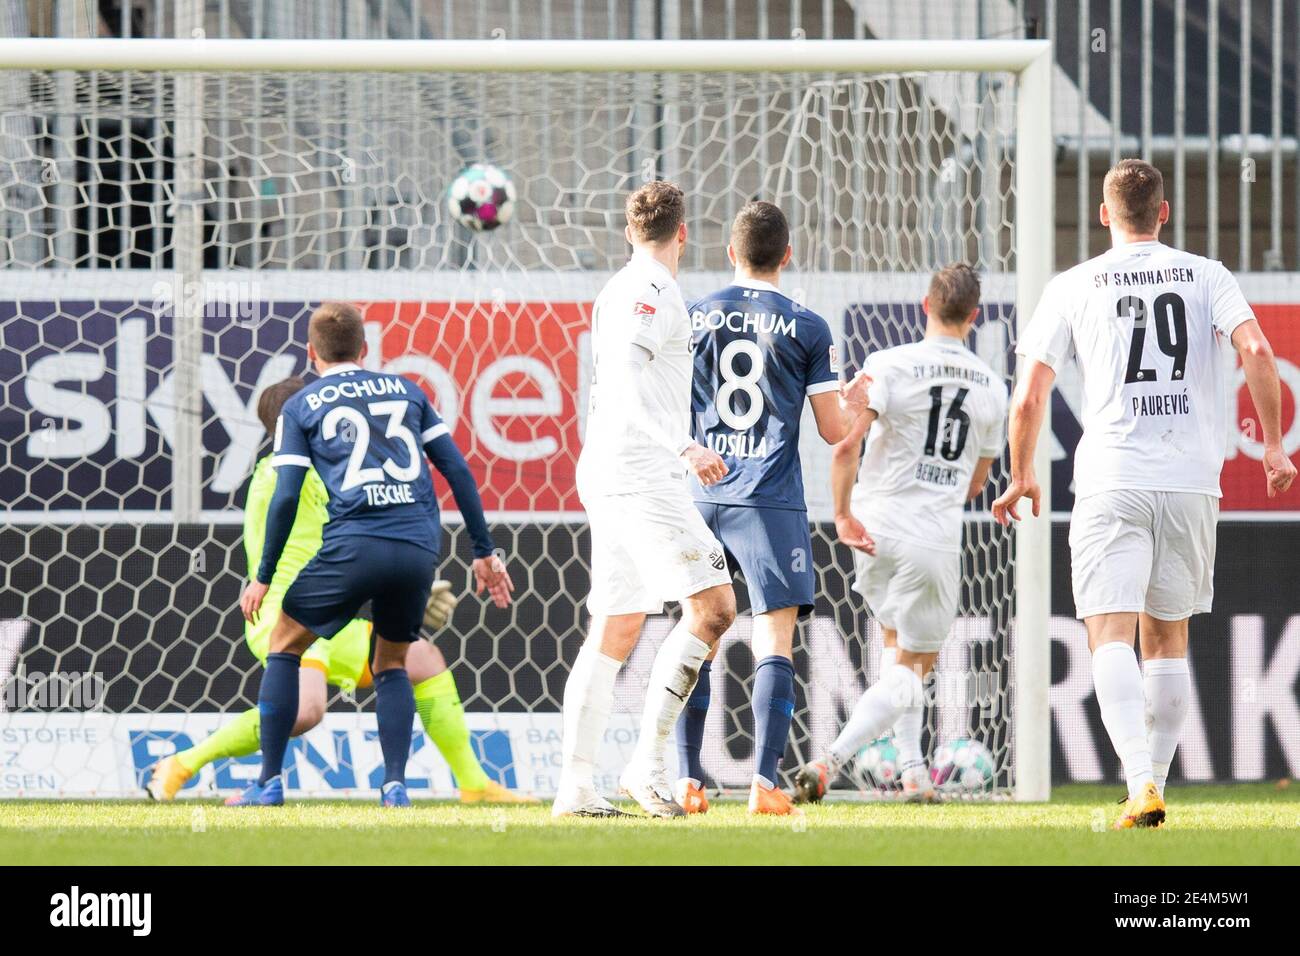 Sandhausen, Germany. 24th Jan, 2021. Football: 2nd Bundesliga, SV Sandhausen - VfL Bochum, Matchday 17, BWT-Stadion am Hardtwald. Sandhausen's Kevin Behrens (2nd from right) scores the goal for 1:0. Credit: Tom Weller/dpa - IMPORTANT NOTE: In accordance with the regulations of the DFL Deutsche Fußball Liga and/or the DFB Deutscher Fußball-Bund, it is prohibited to use or have used photographs taken in the stadium and/or of the match in the form of sequence pictures and/or video-like photo series./dpa/Alamy Live News Stock Photo